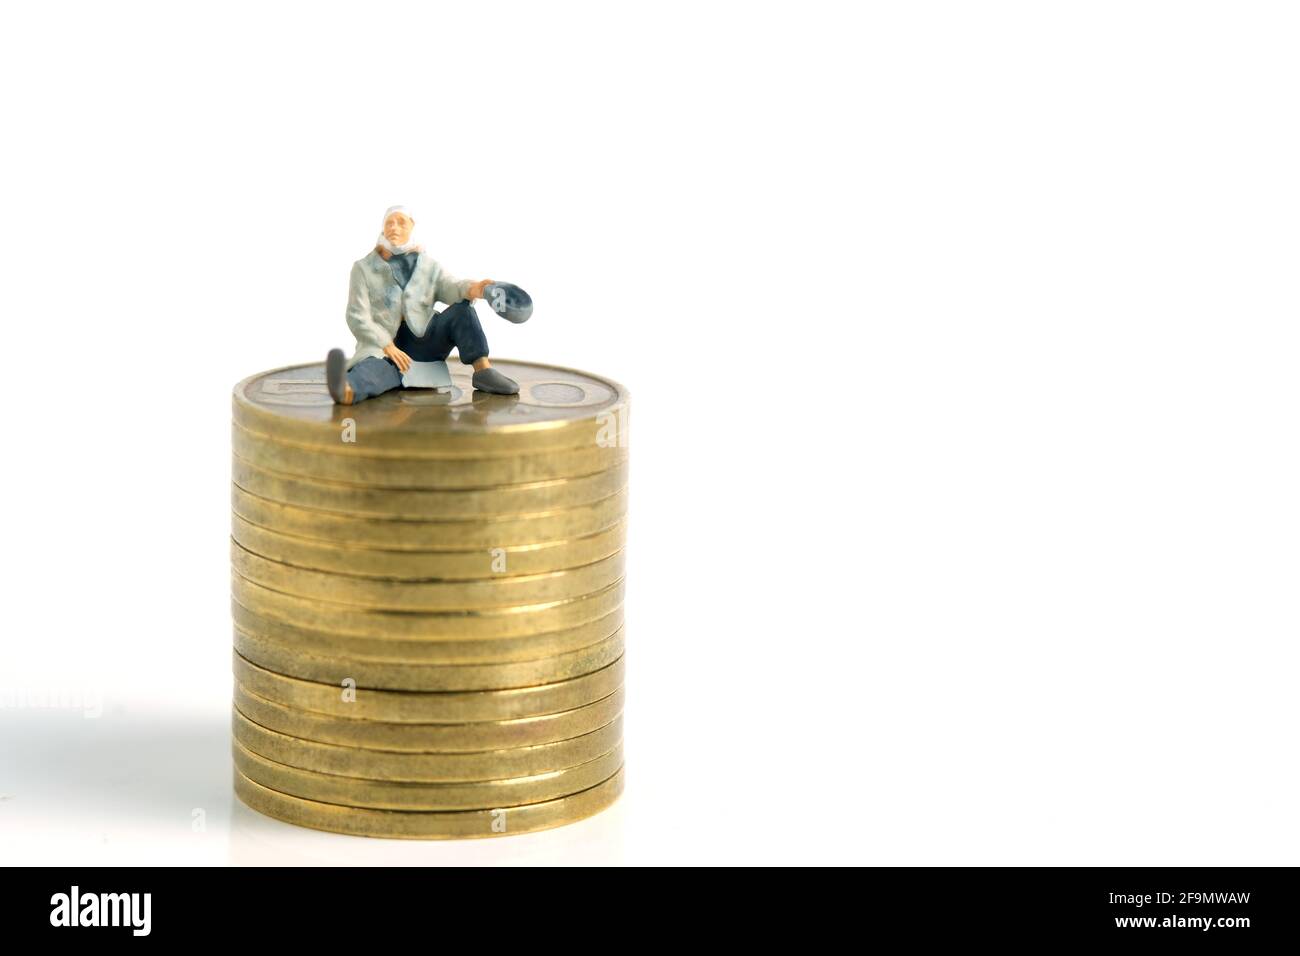 Miniature tiny people toys photography. A poor man or a beggar sit above gold coin stack, isolated on white background Stock Photo